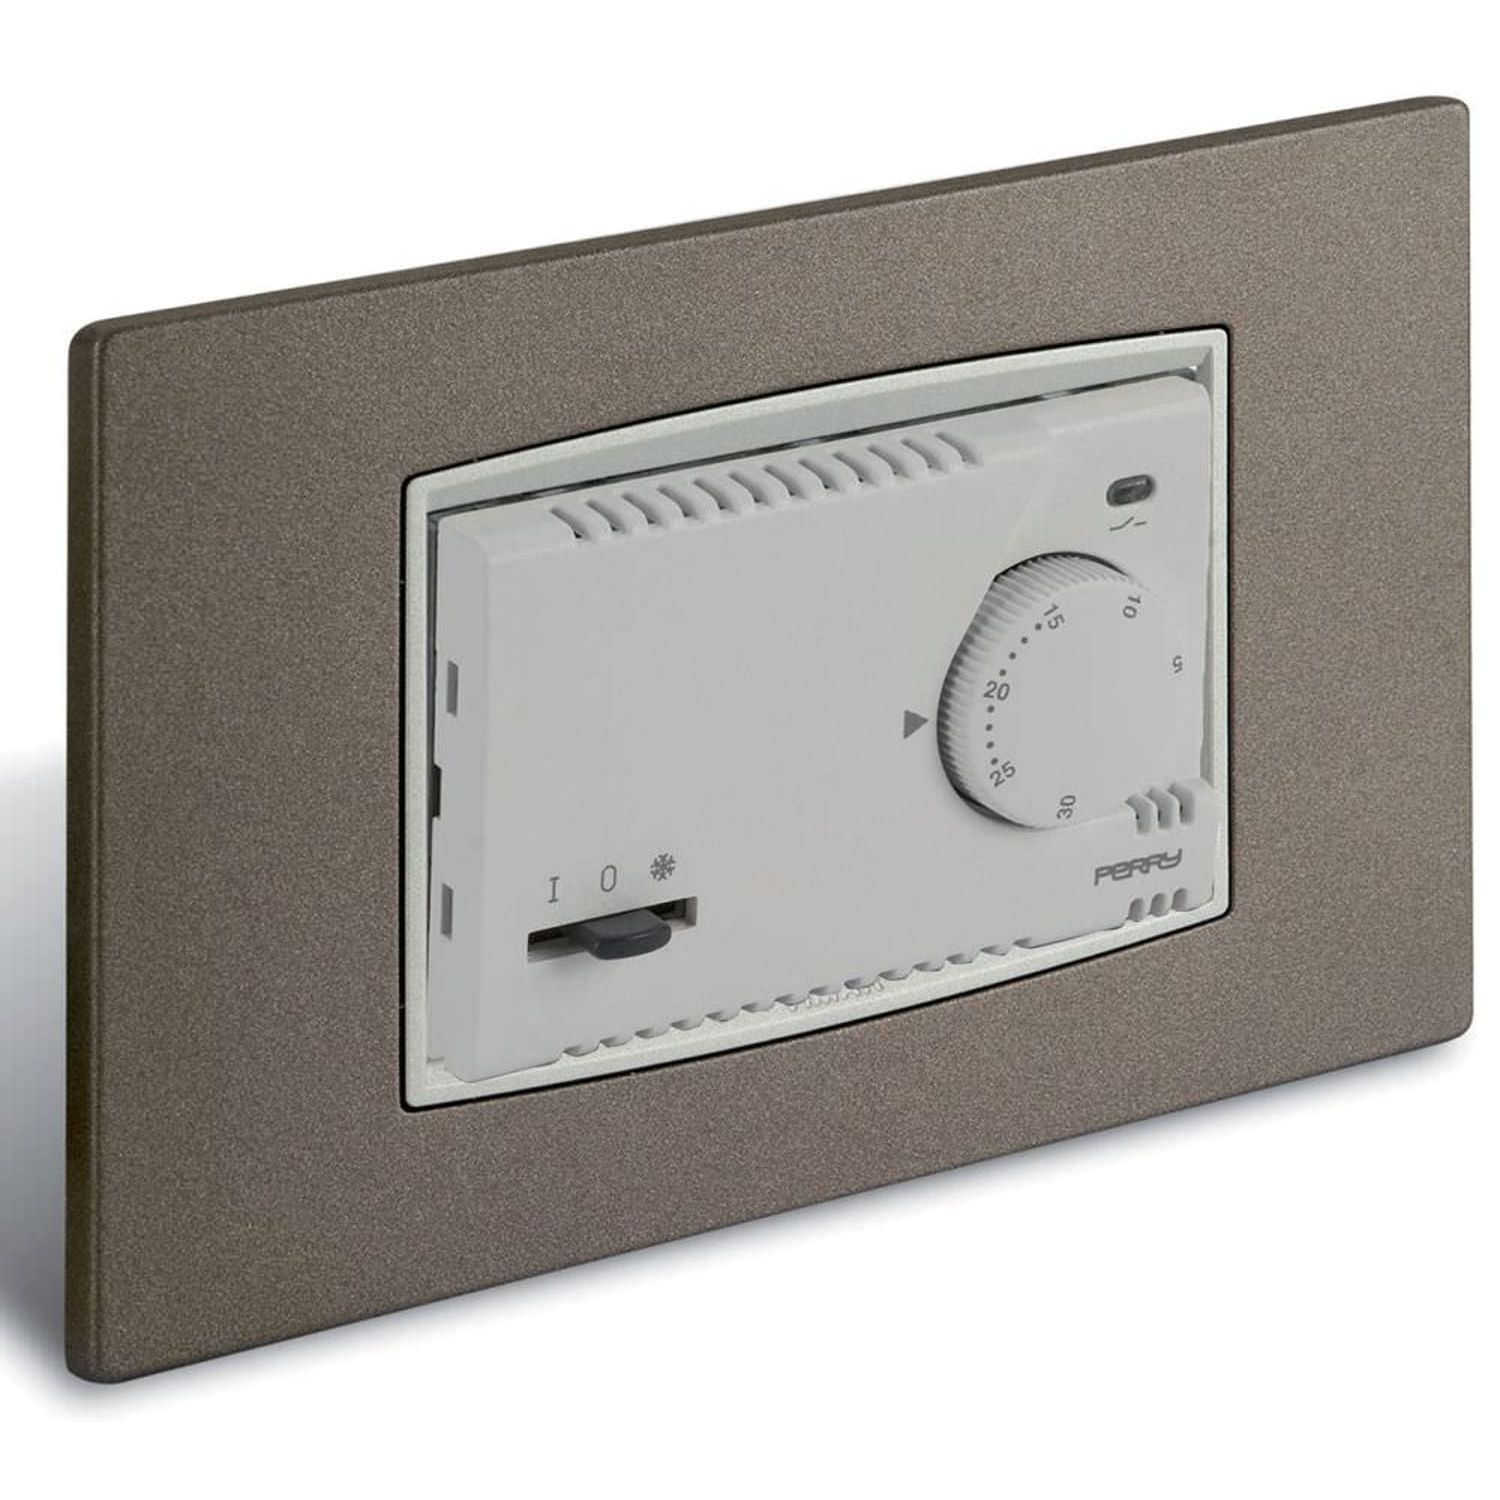 Perry electronic builtin thermostat